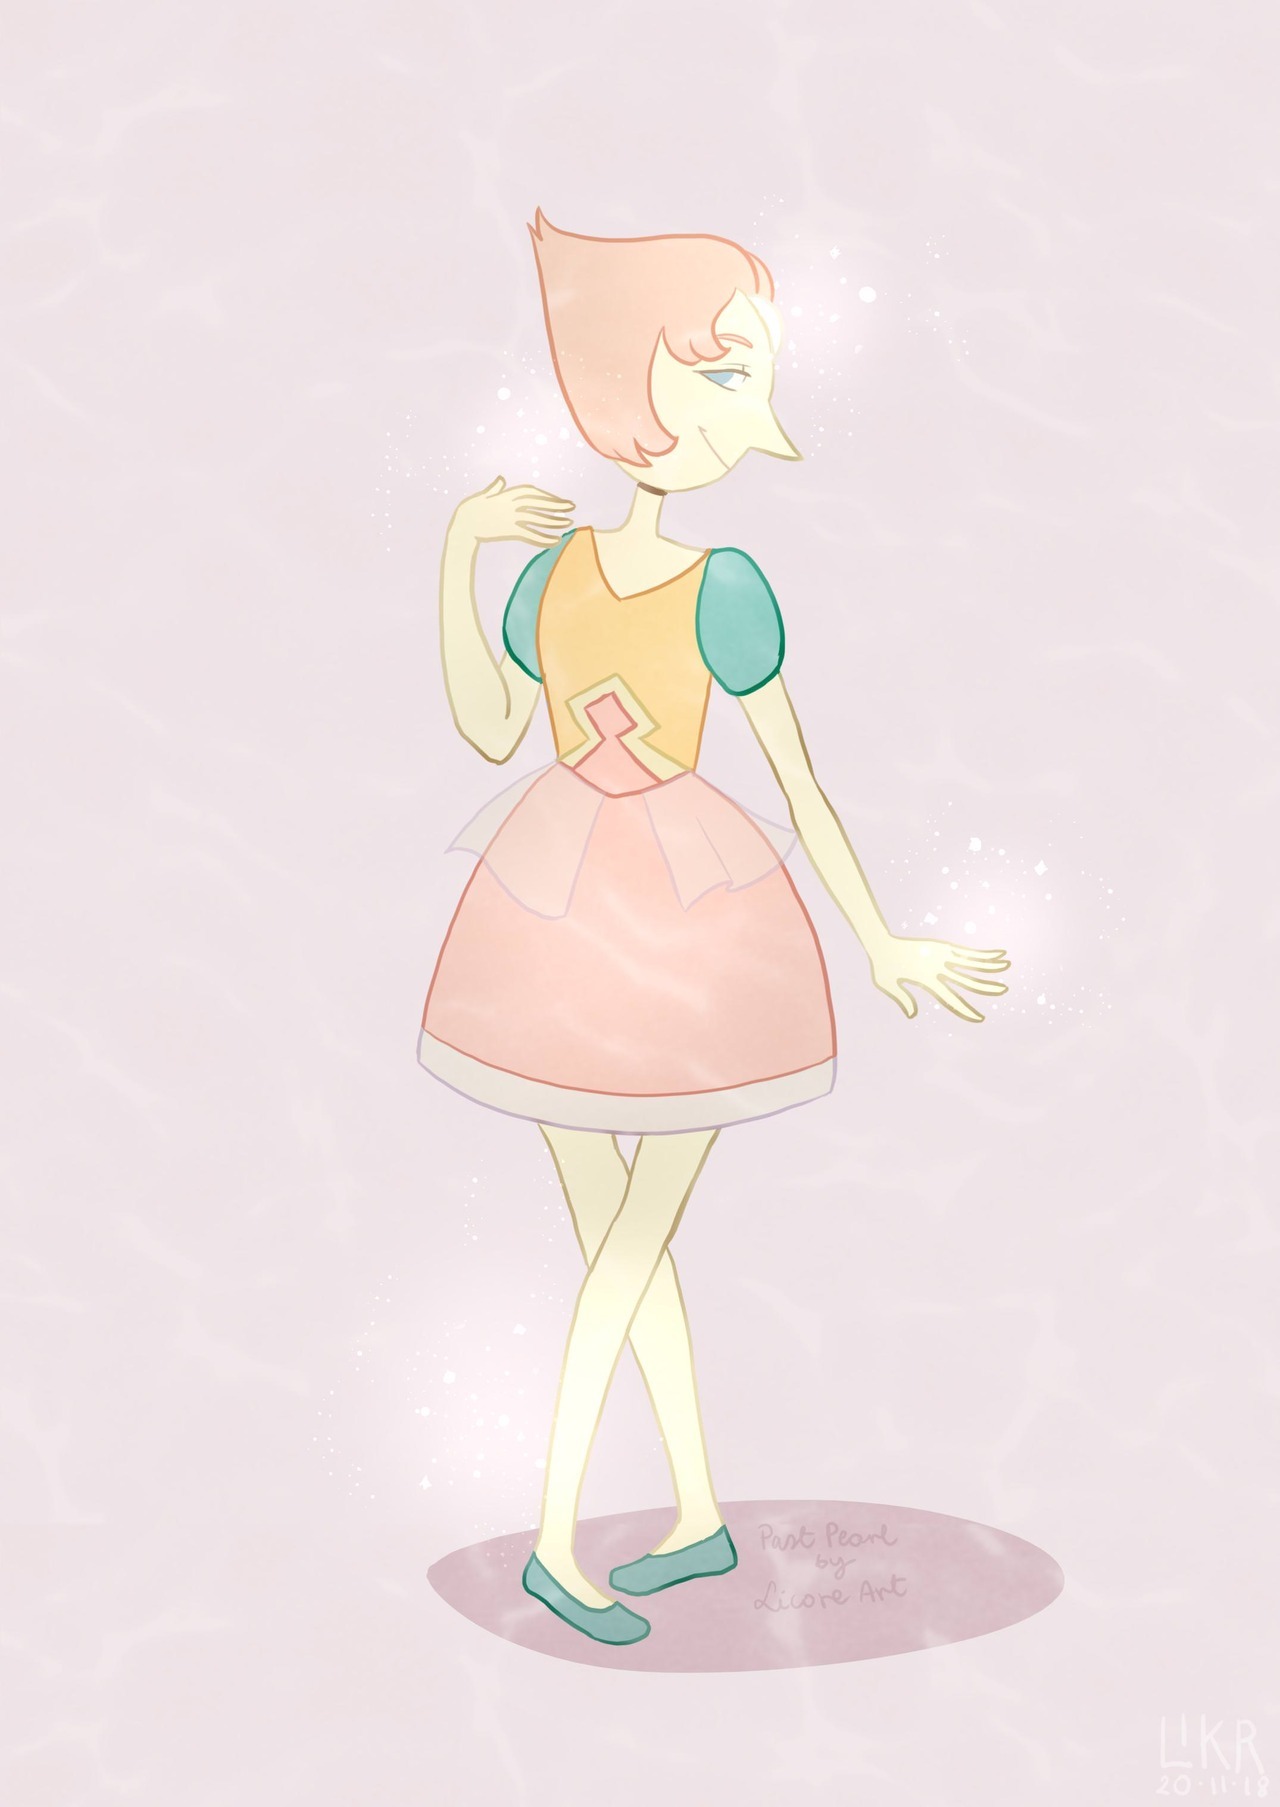 So, this is Past Pearl from Steven Universe. Inspired by @elliesillustrations :3